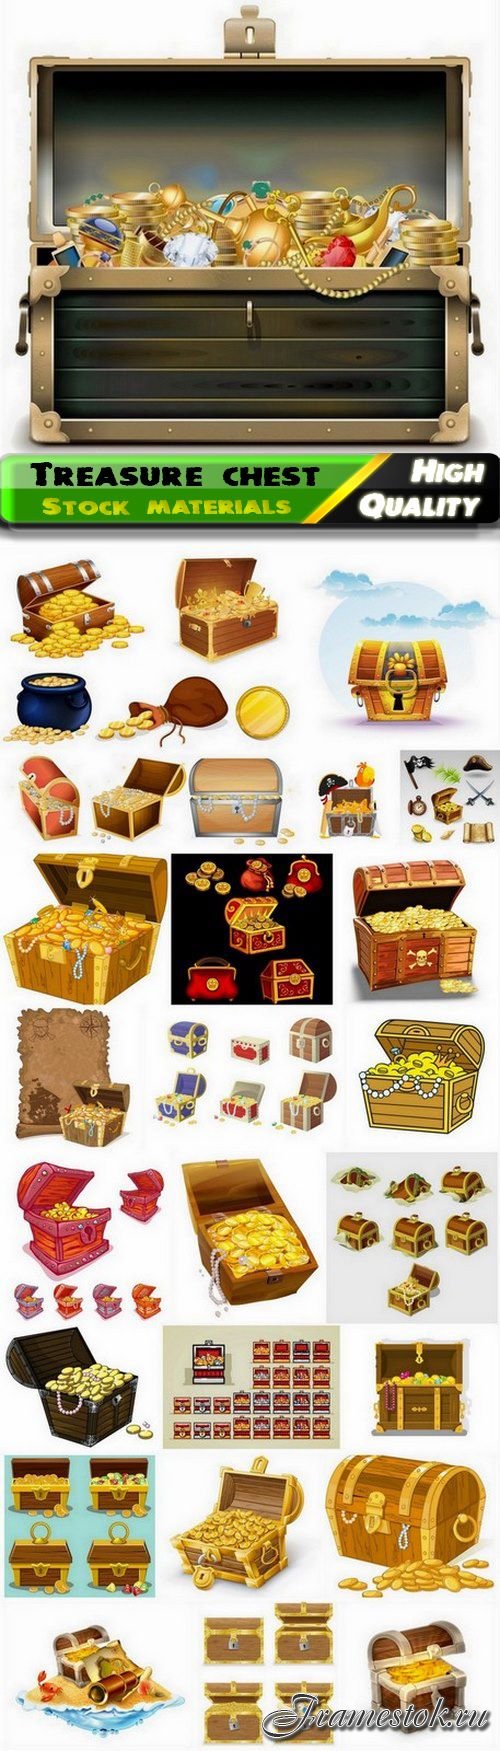 Pirate treasure chest and gold coin - 25 Eps